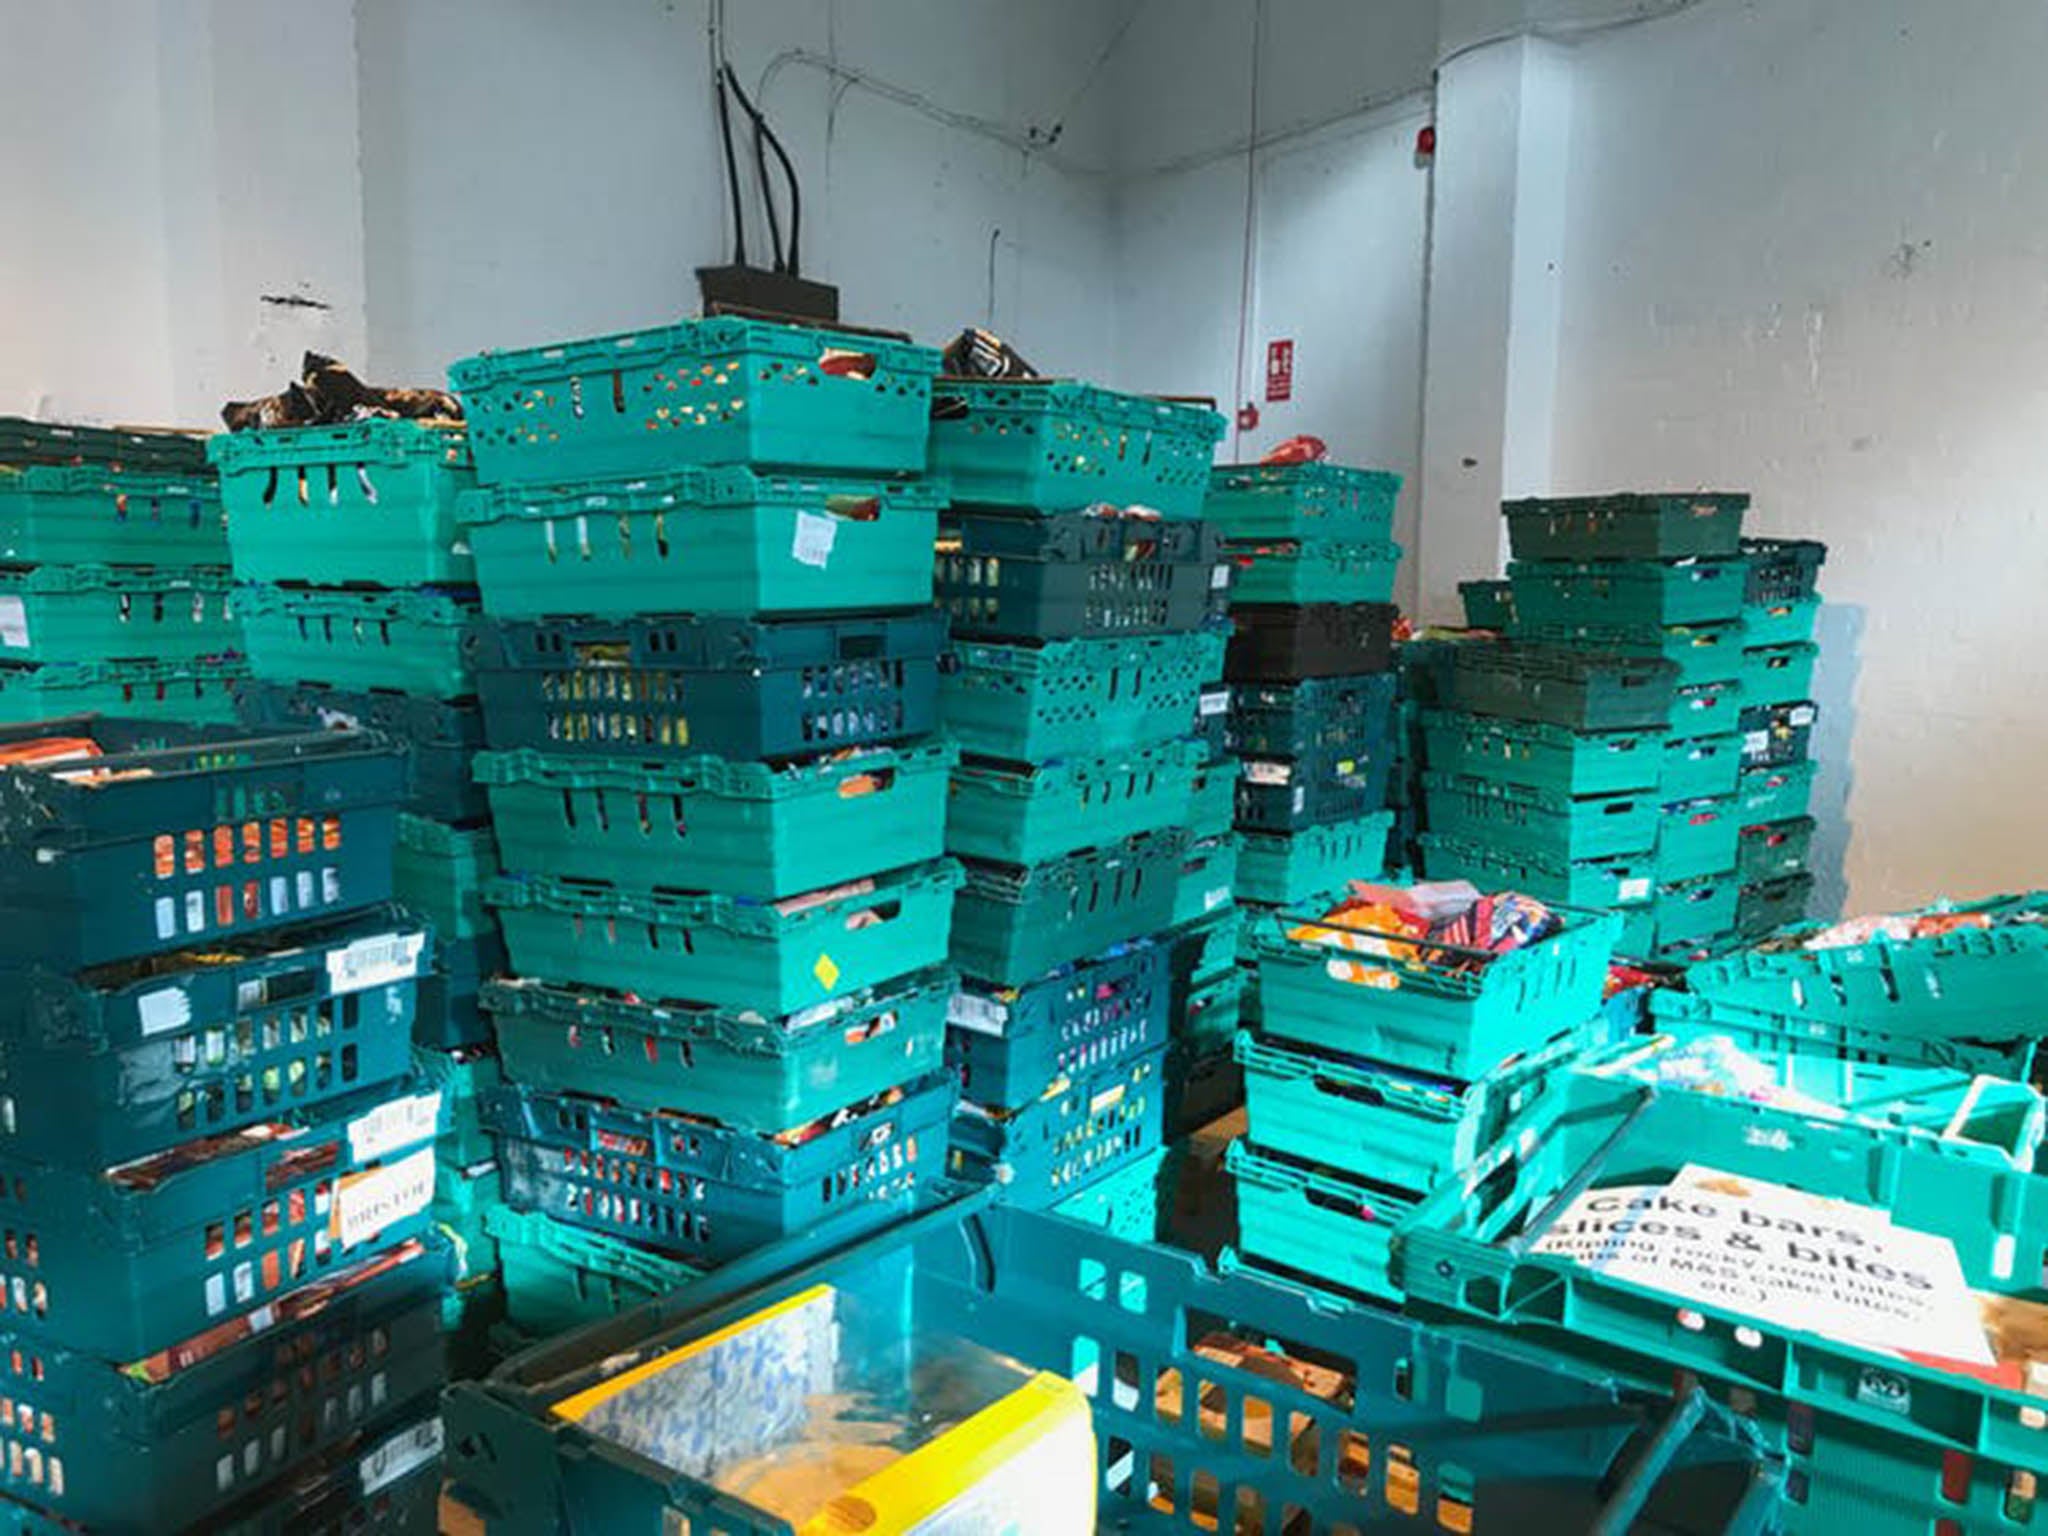 Donated surplus is used by charities to make millions of meals